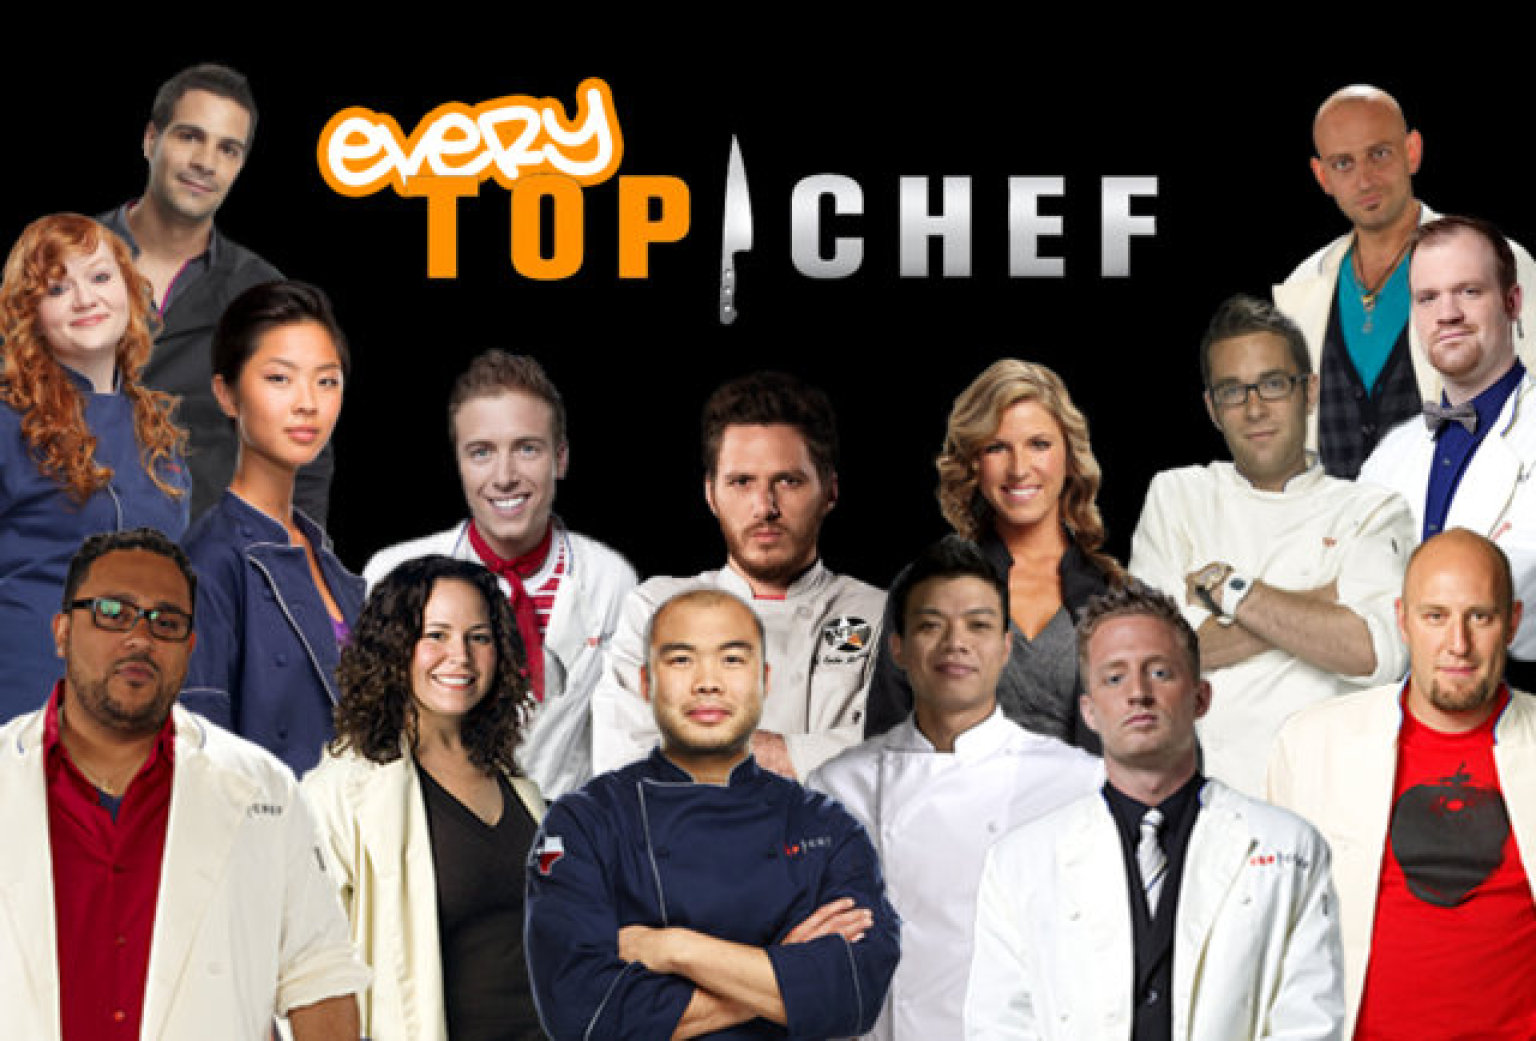 The Astoundingly Comprehensive Guide to EVERY SINGLE Top Chef